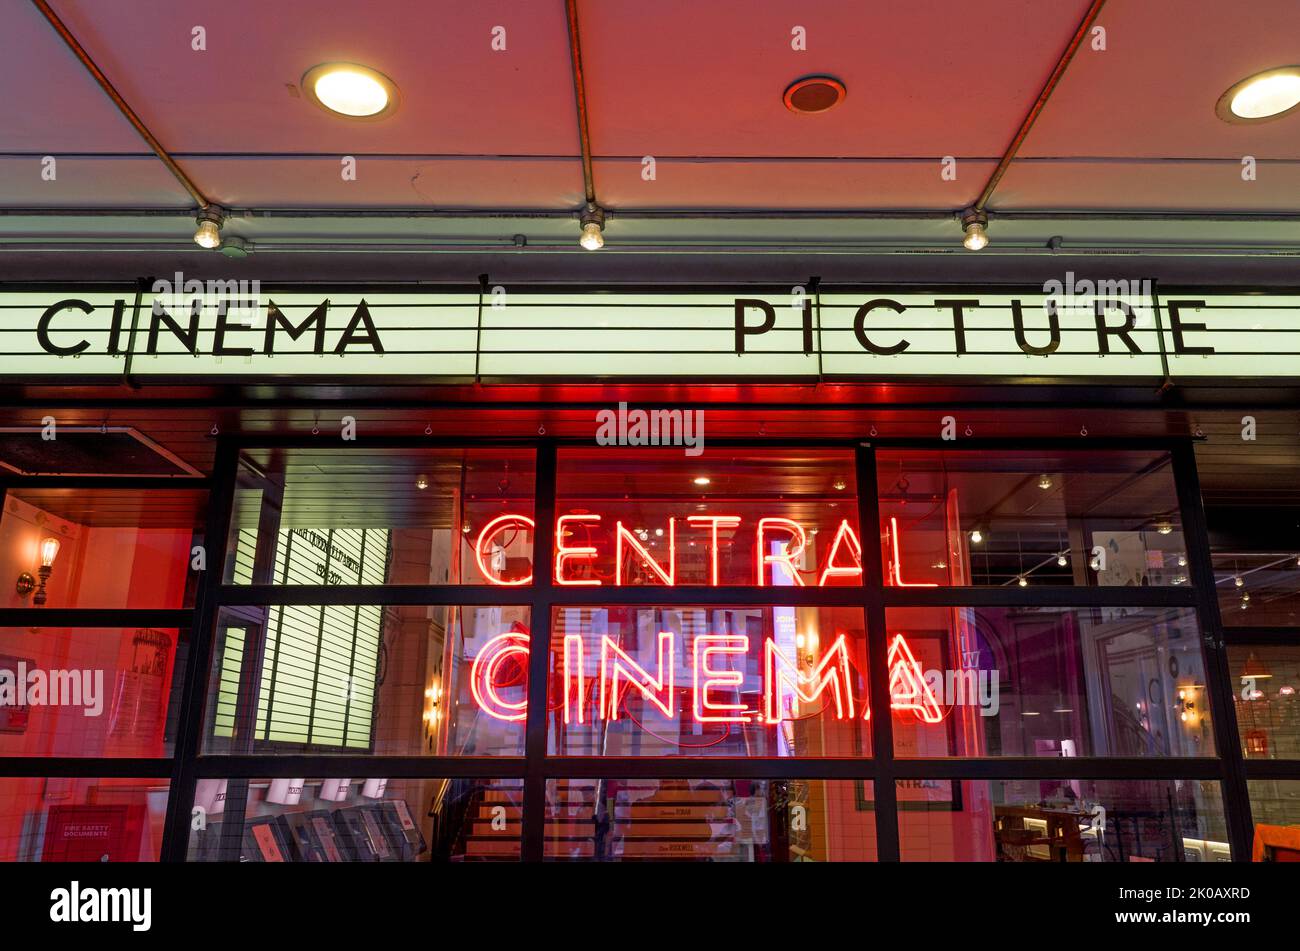 Red Central Cinema neon sign in the window of a Picture house Cinema. London Stock Photo